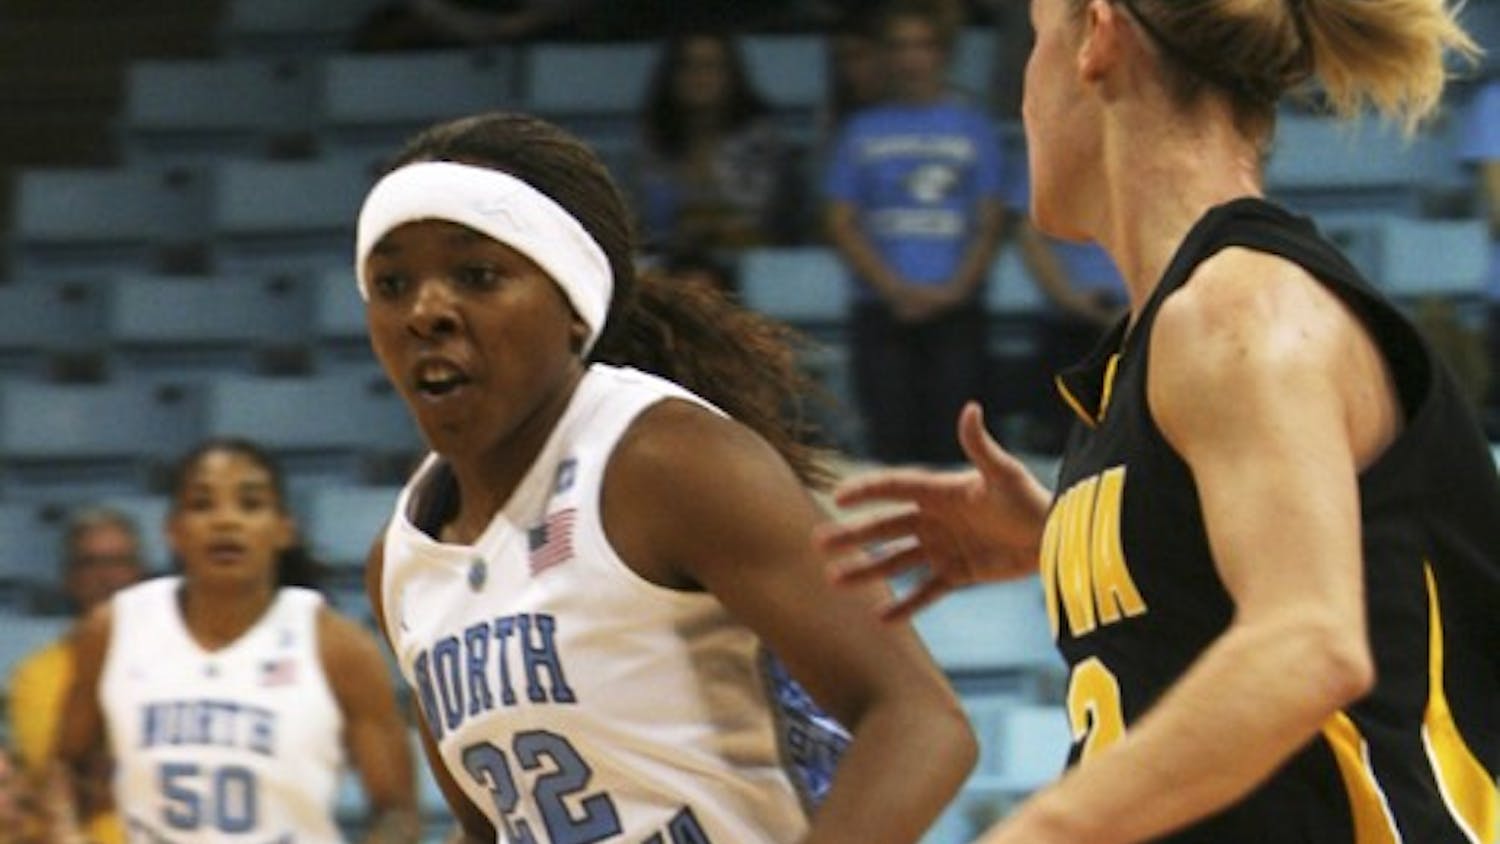 	Cetera DeGraffenreid suffered an 11-point loss to N.C. State last season despite her best efforts, scoring 22 points and dishing out five assists.